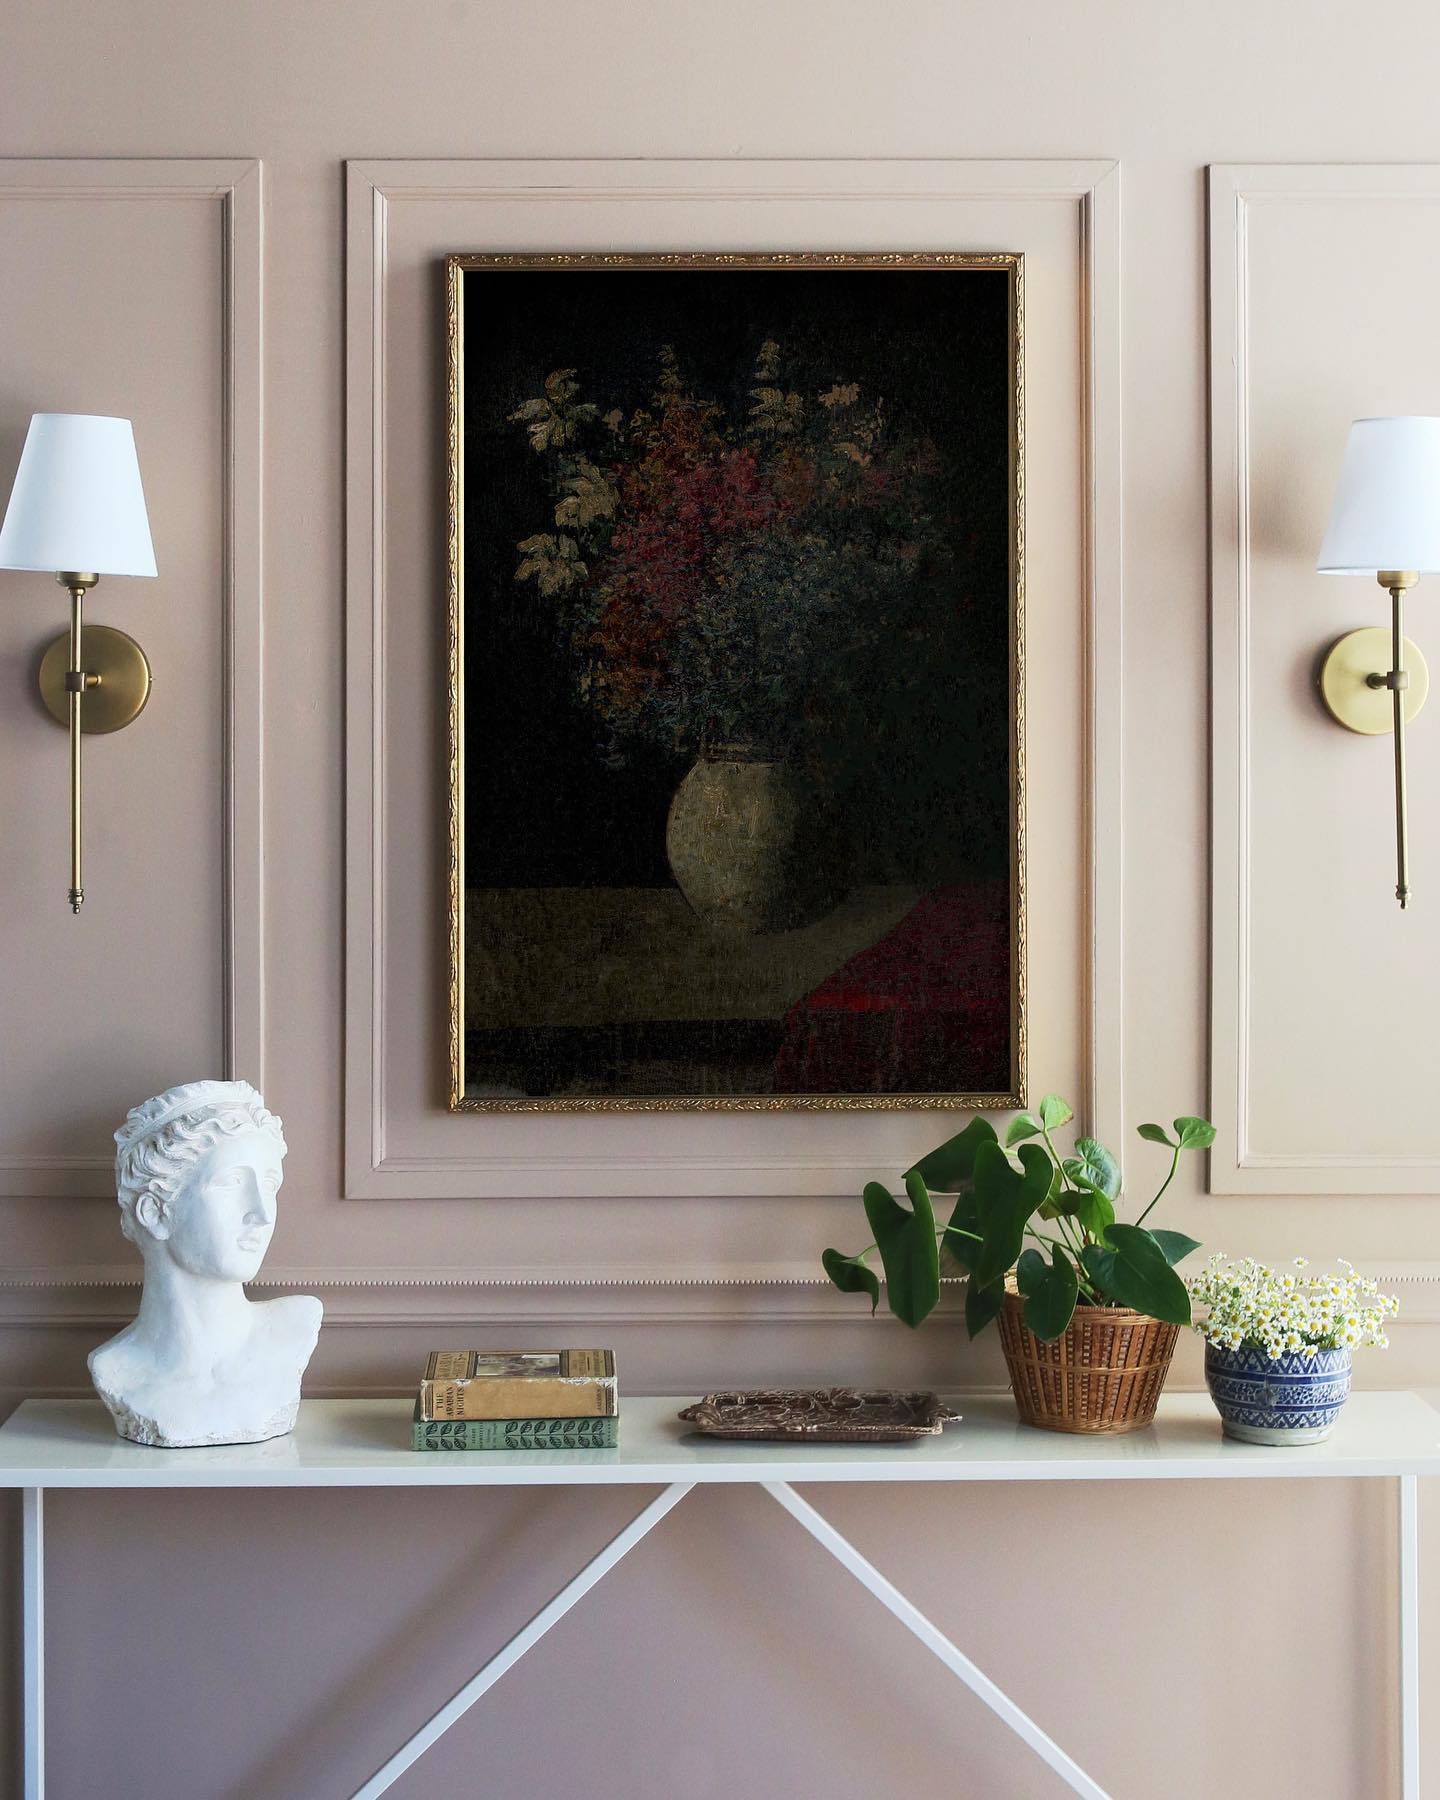 We love the look of sconces tucked inside wainscoting in a dining room to accent your artwork! www.juniperprintshop.com